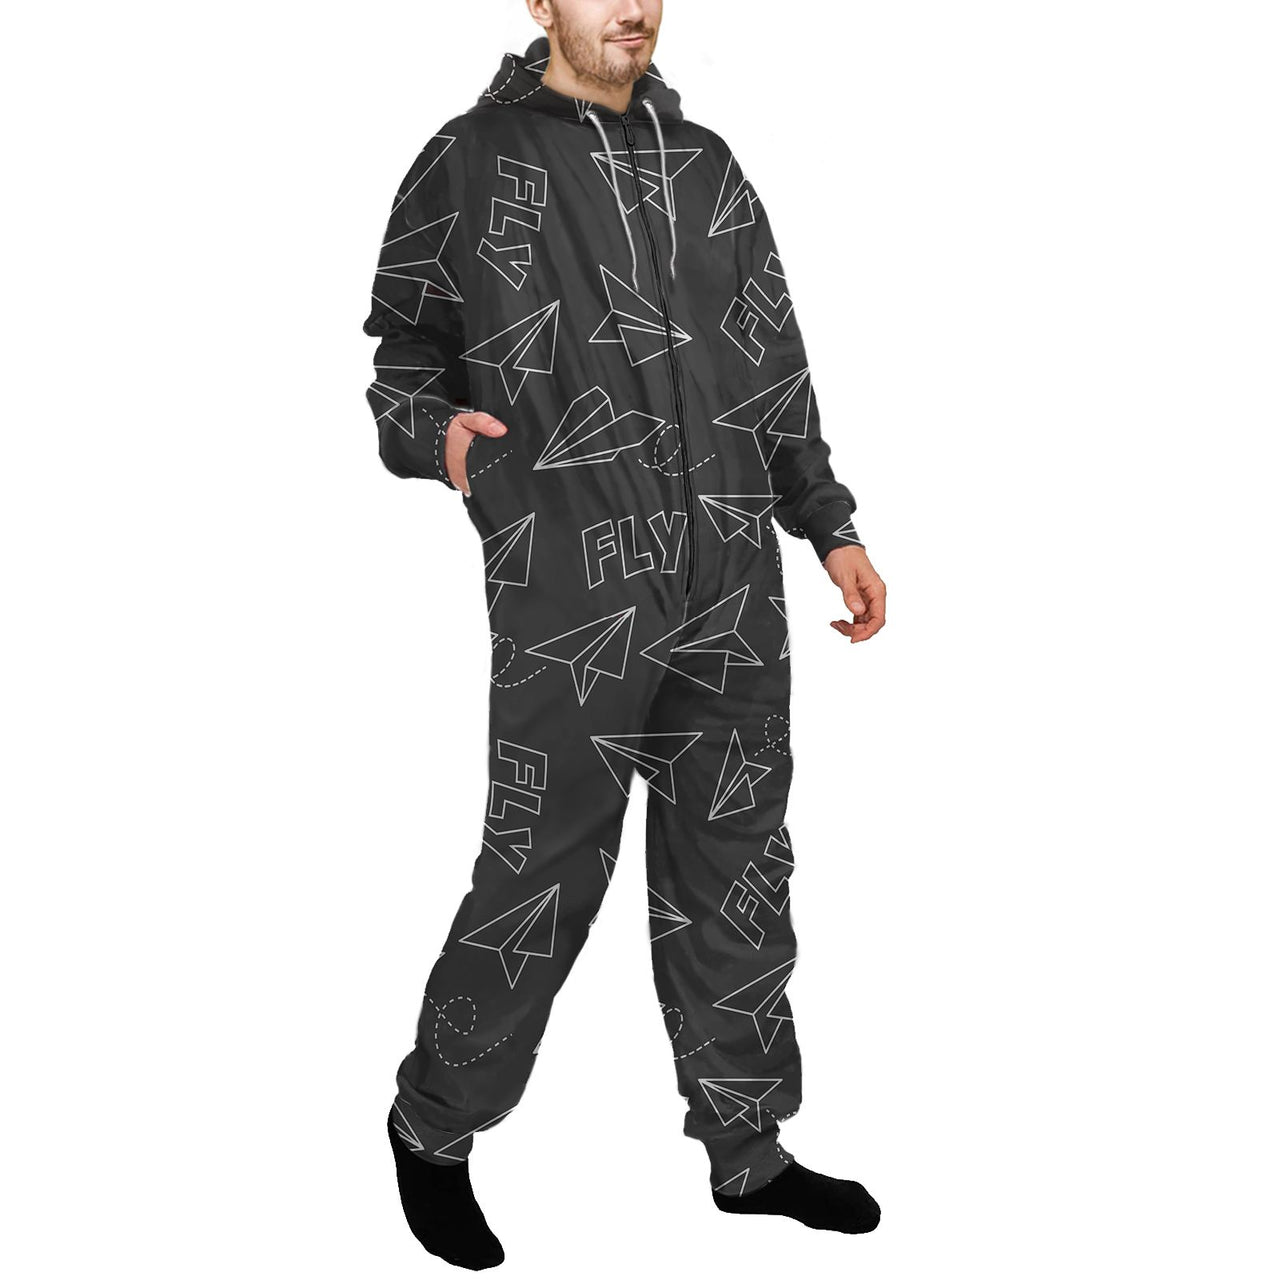 Paper Airplane & Fly (Gray) Designed Jumpsuit for Men & Women